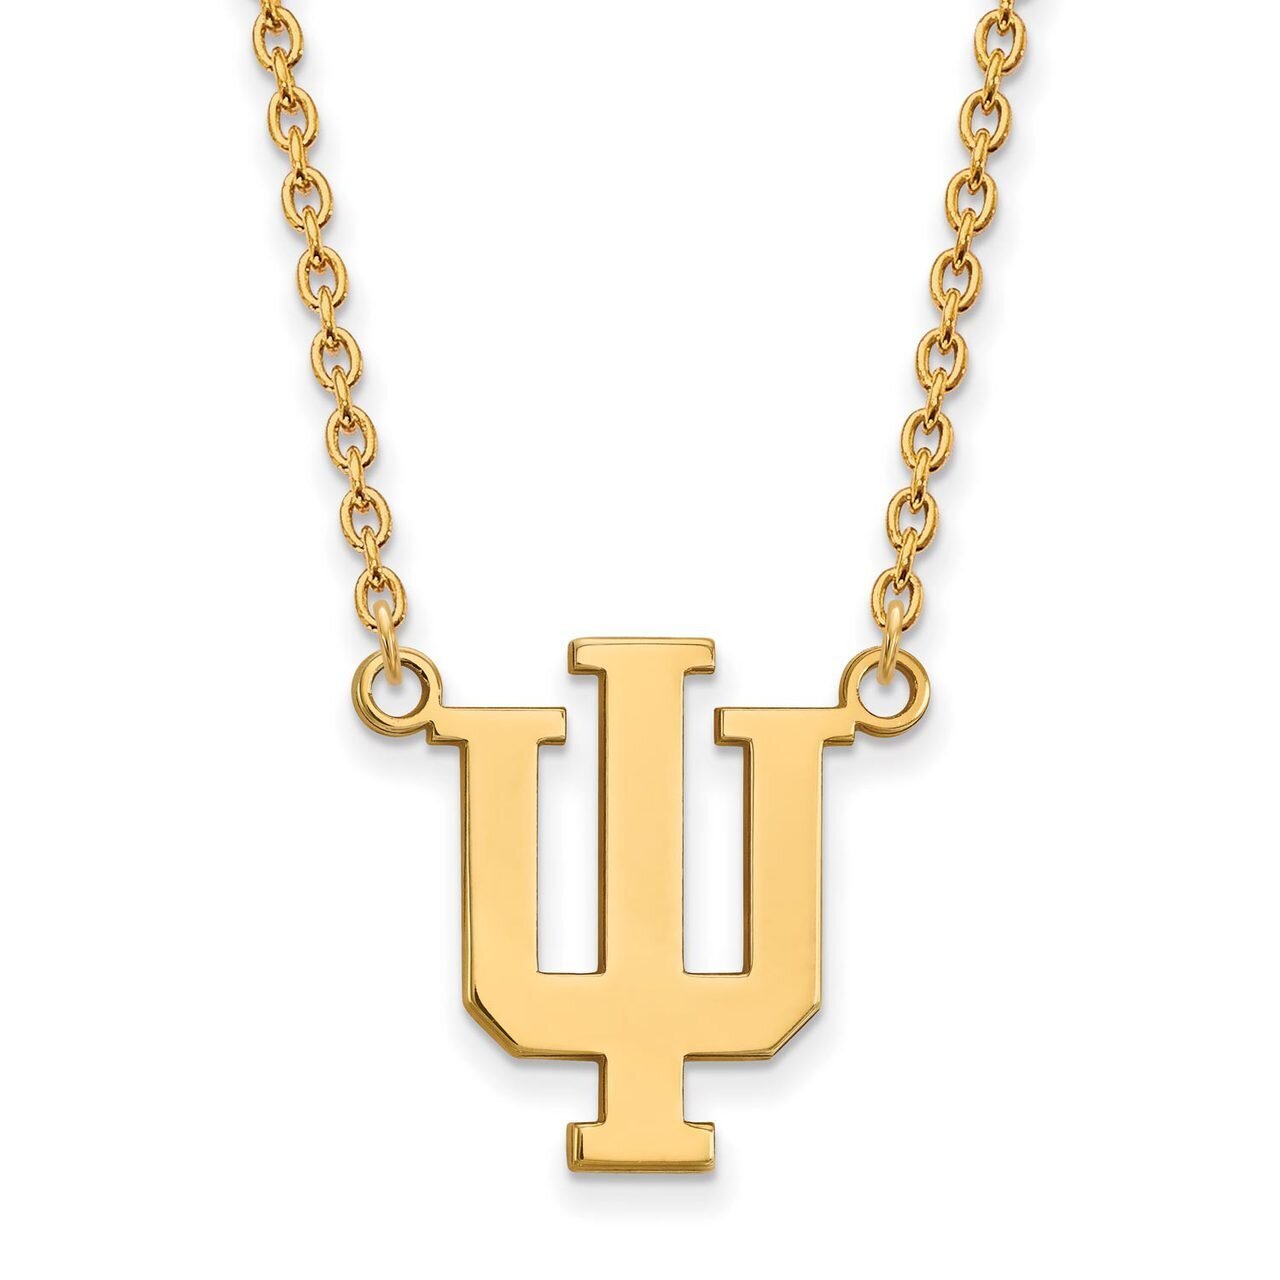 Indiana University Large Pendant with Chain Necklace 14k Yellow Gold 4Y016IU-18